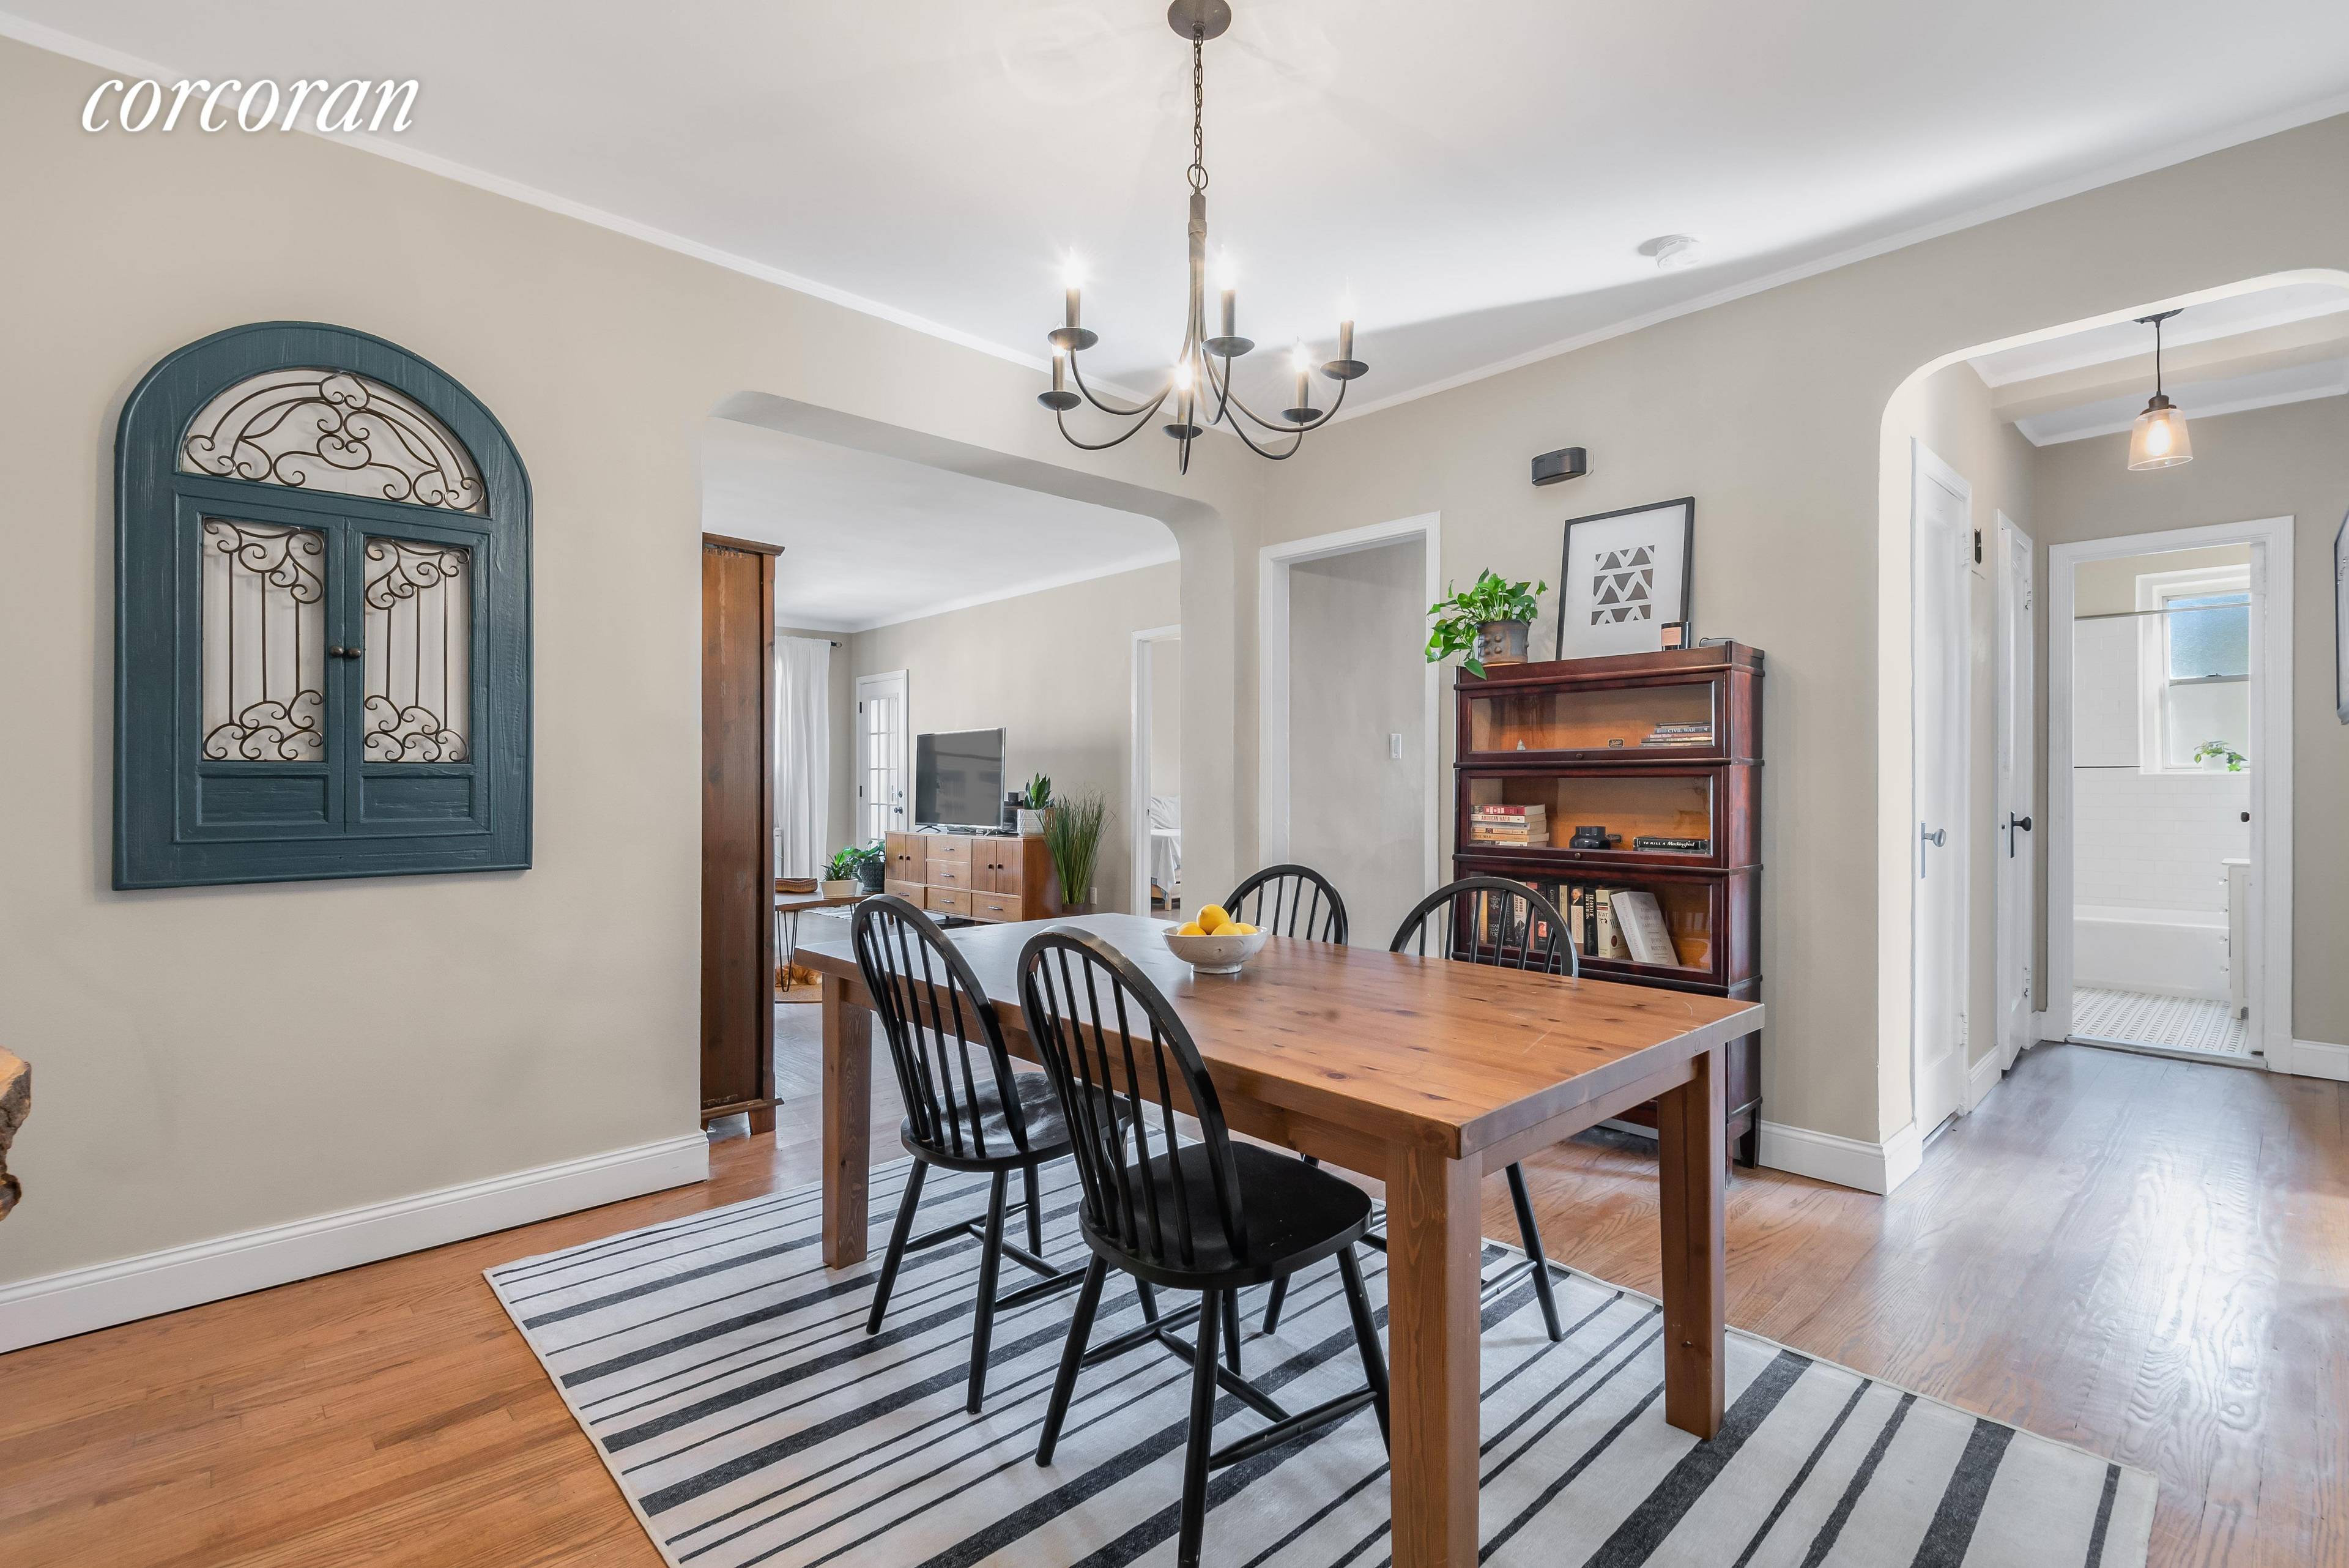 Welcome to Terrace Gardens Plaza, this spacious top floor 2bed 1bath apartment is located on a lovely treelined block in the flourishing neighborhood of Midwood, Brooklyn.